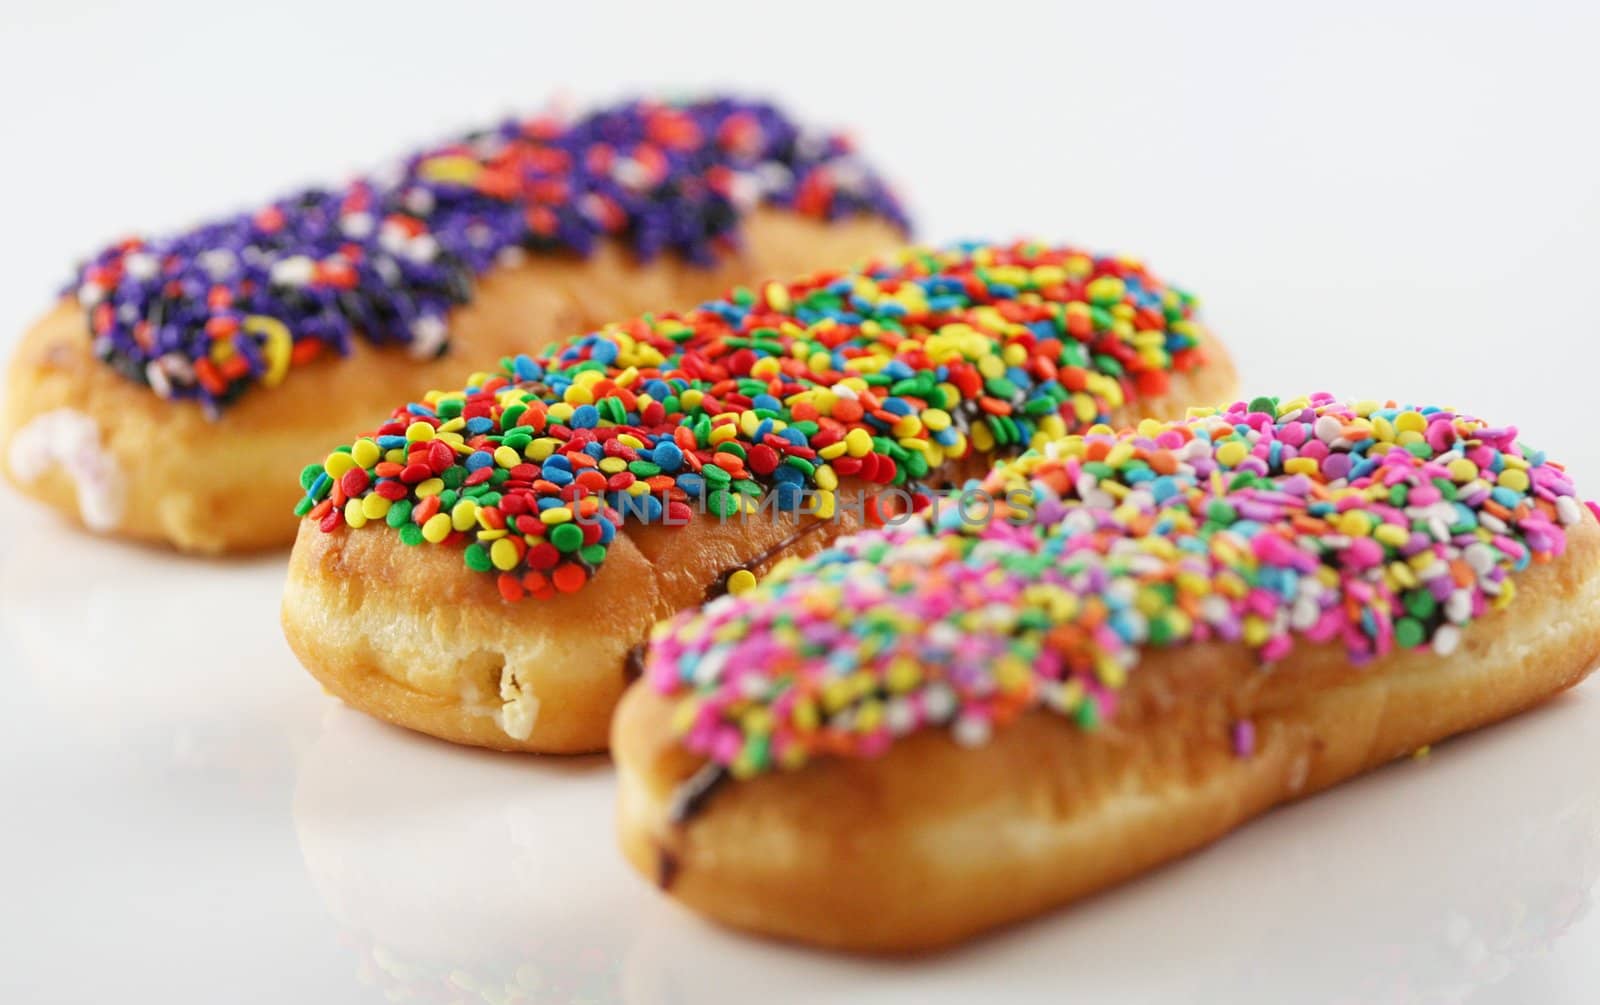 Three delicious colorful donuts